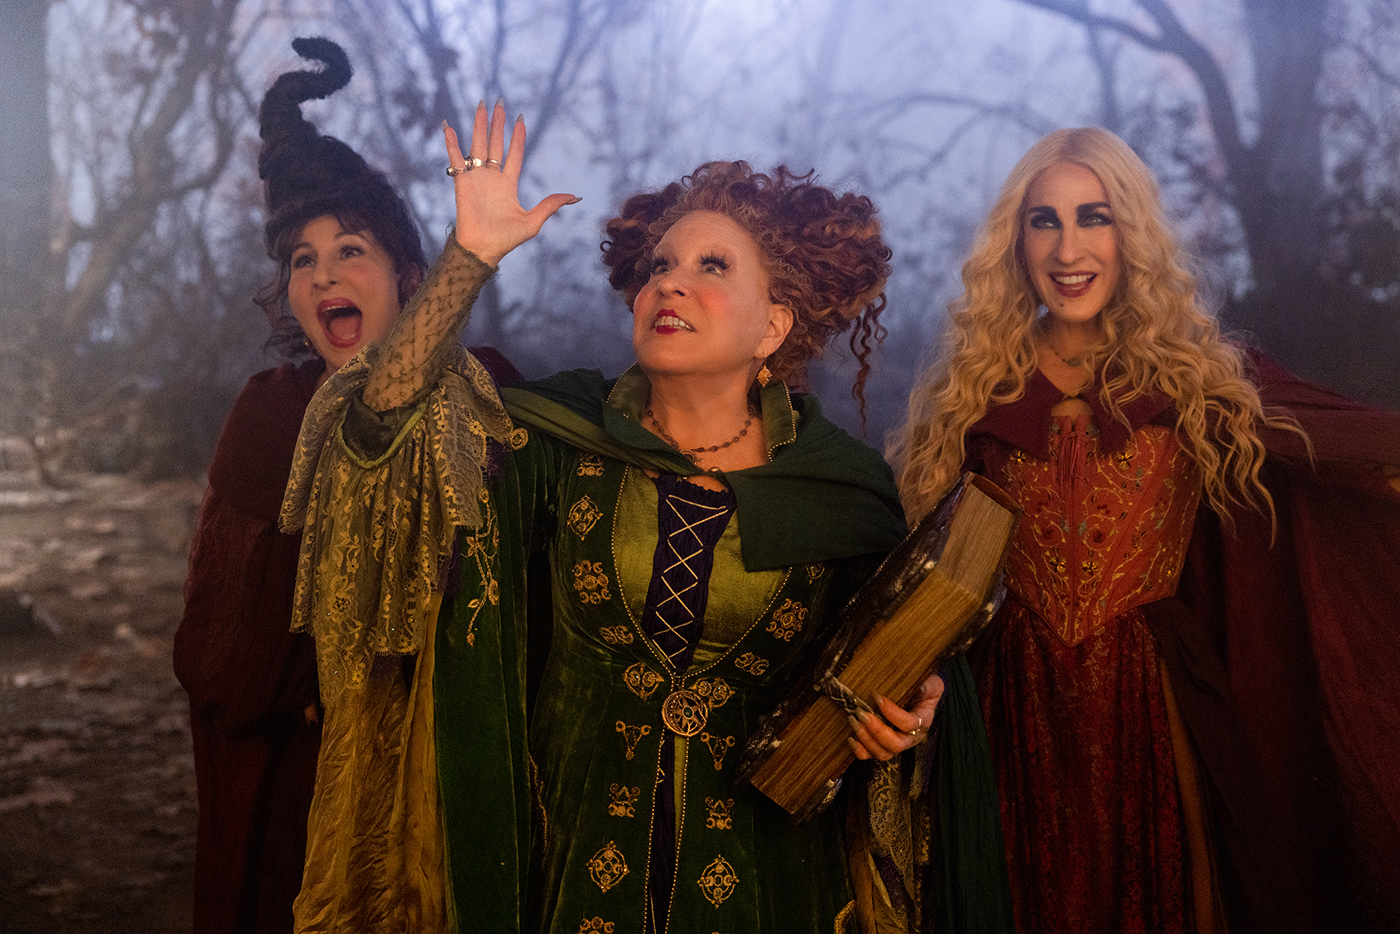 Kathy Najimy as Mary Sanderson, Bette Midler as Winifred Sanderson, and Sarah Jessica Parker as Sarah Sanderson in Disney's live-action Hocus Pocus 2.